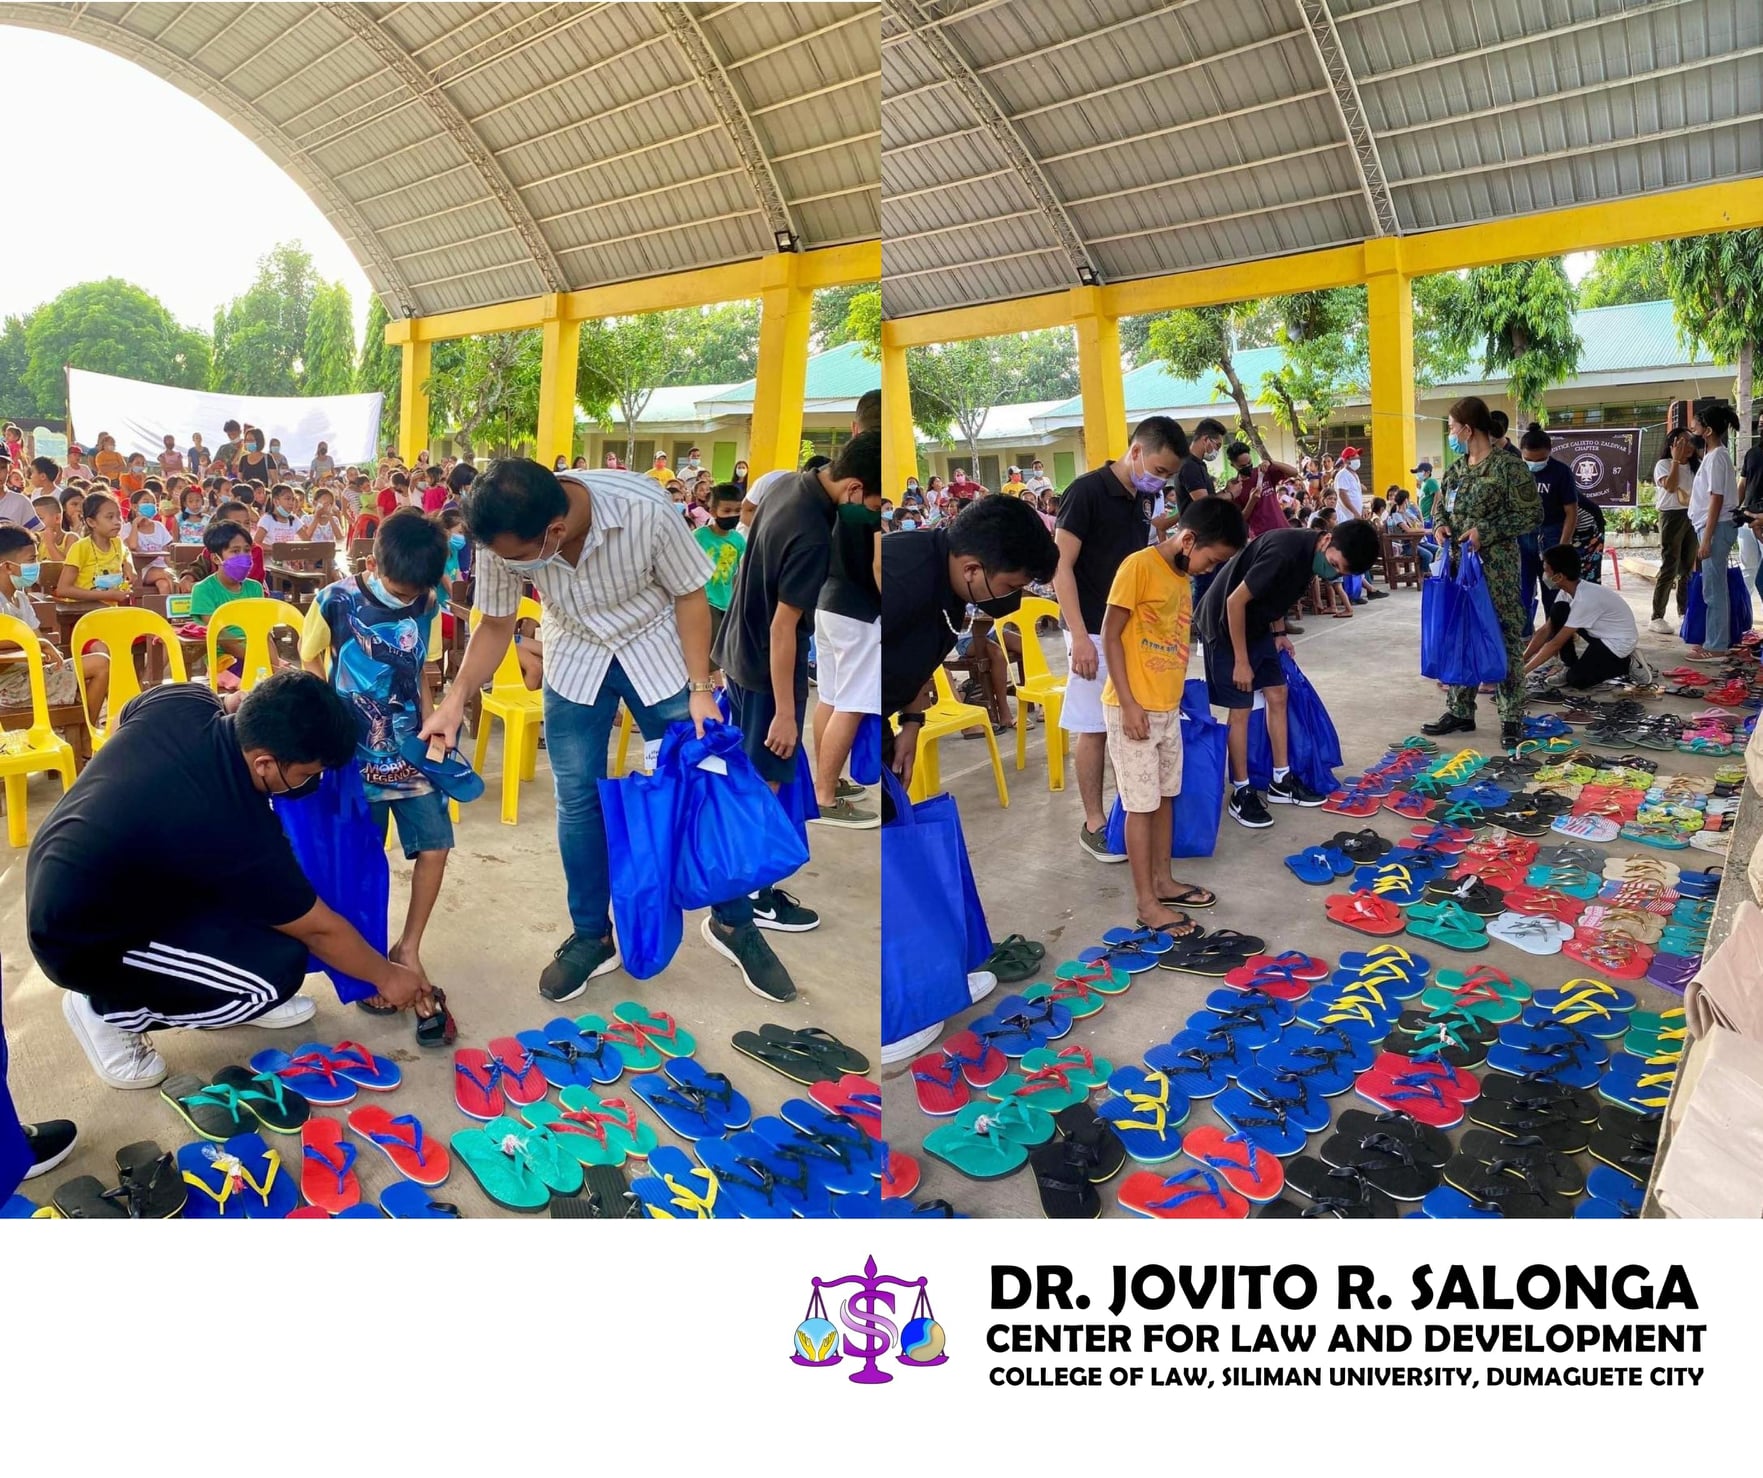 Salonga Center distributes gifts to children in Antique